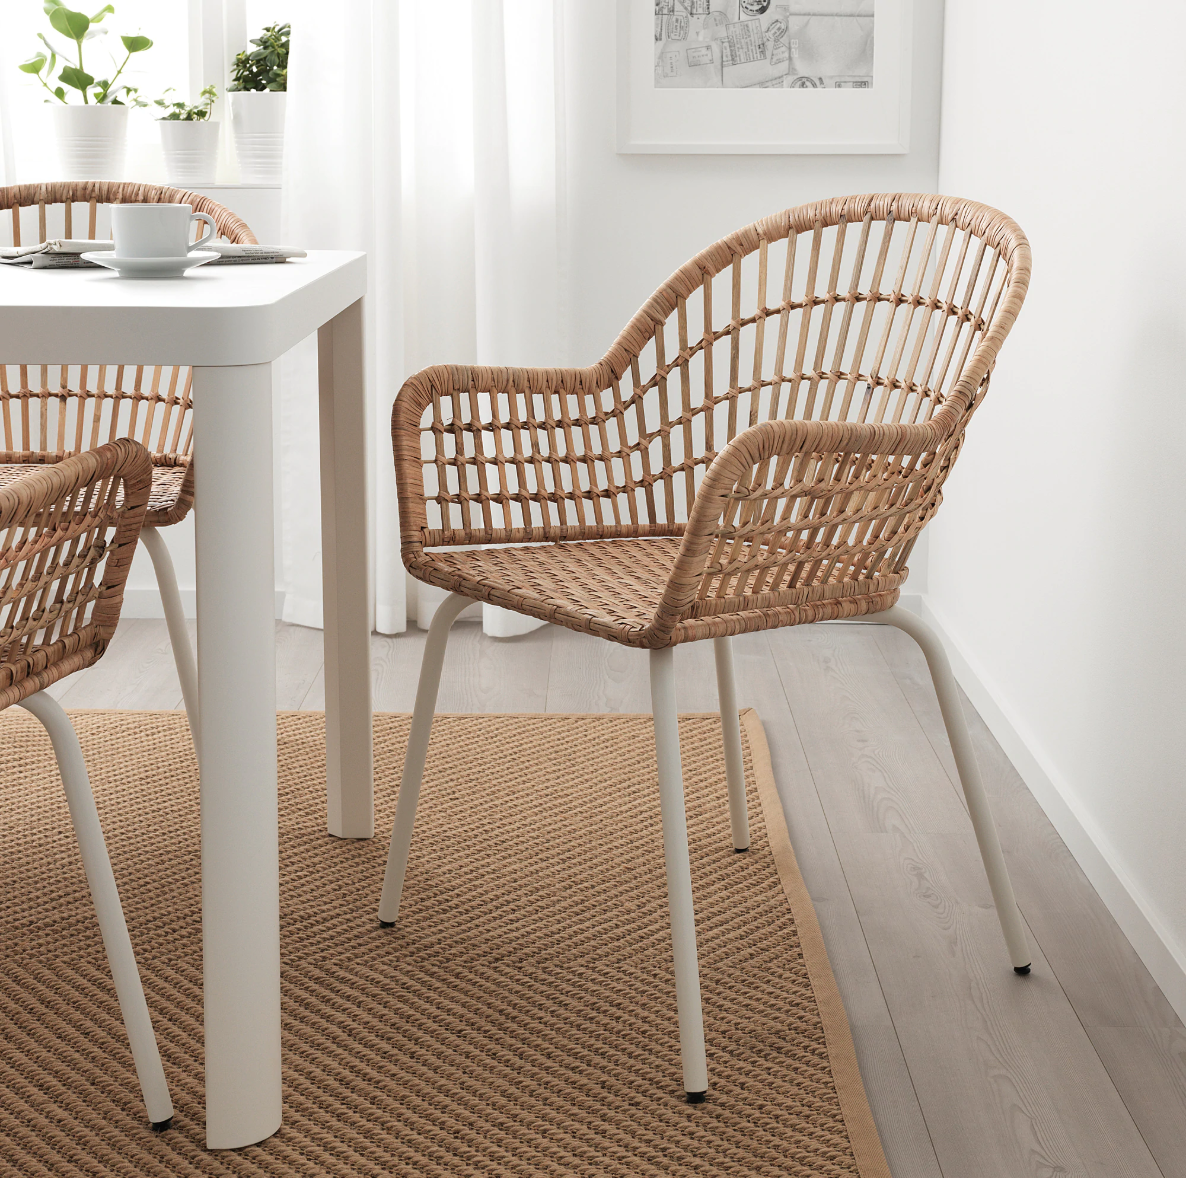 10 Best Ikea Kitchen Tables And Dining, Small Kitchen Table And Chairs Set Ikea